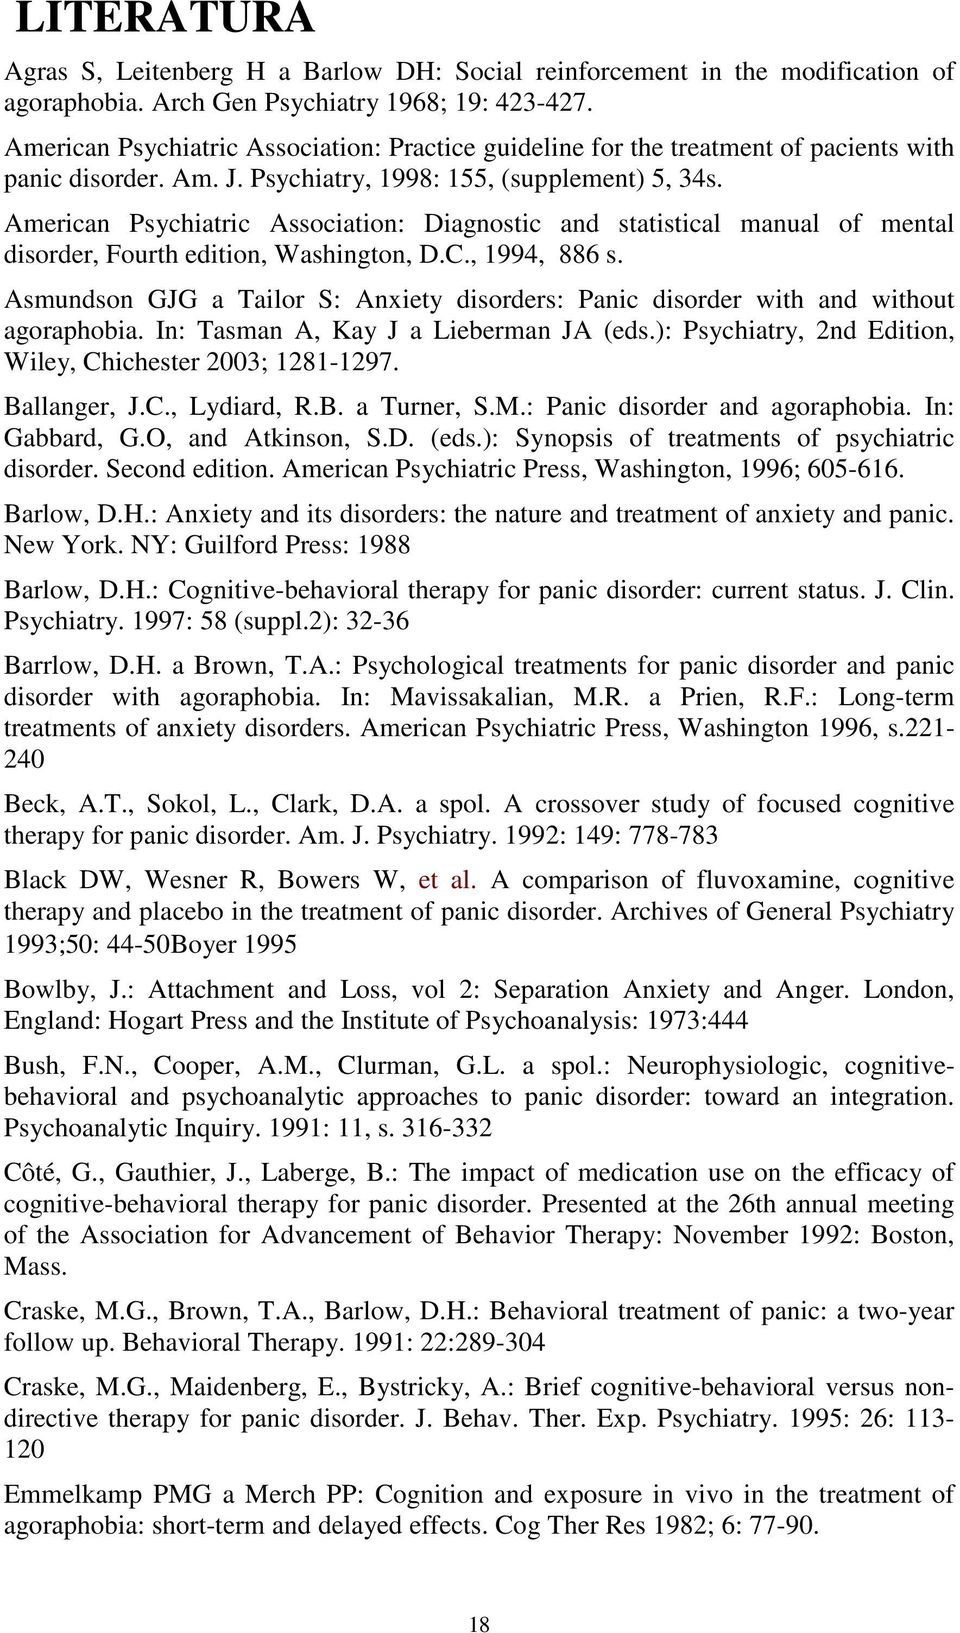 American Psychiatric Association: Diagnostic and statistical manual of mental disorder, Fourth edition, Washington, D.C., 1994, 886 s.